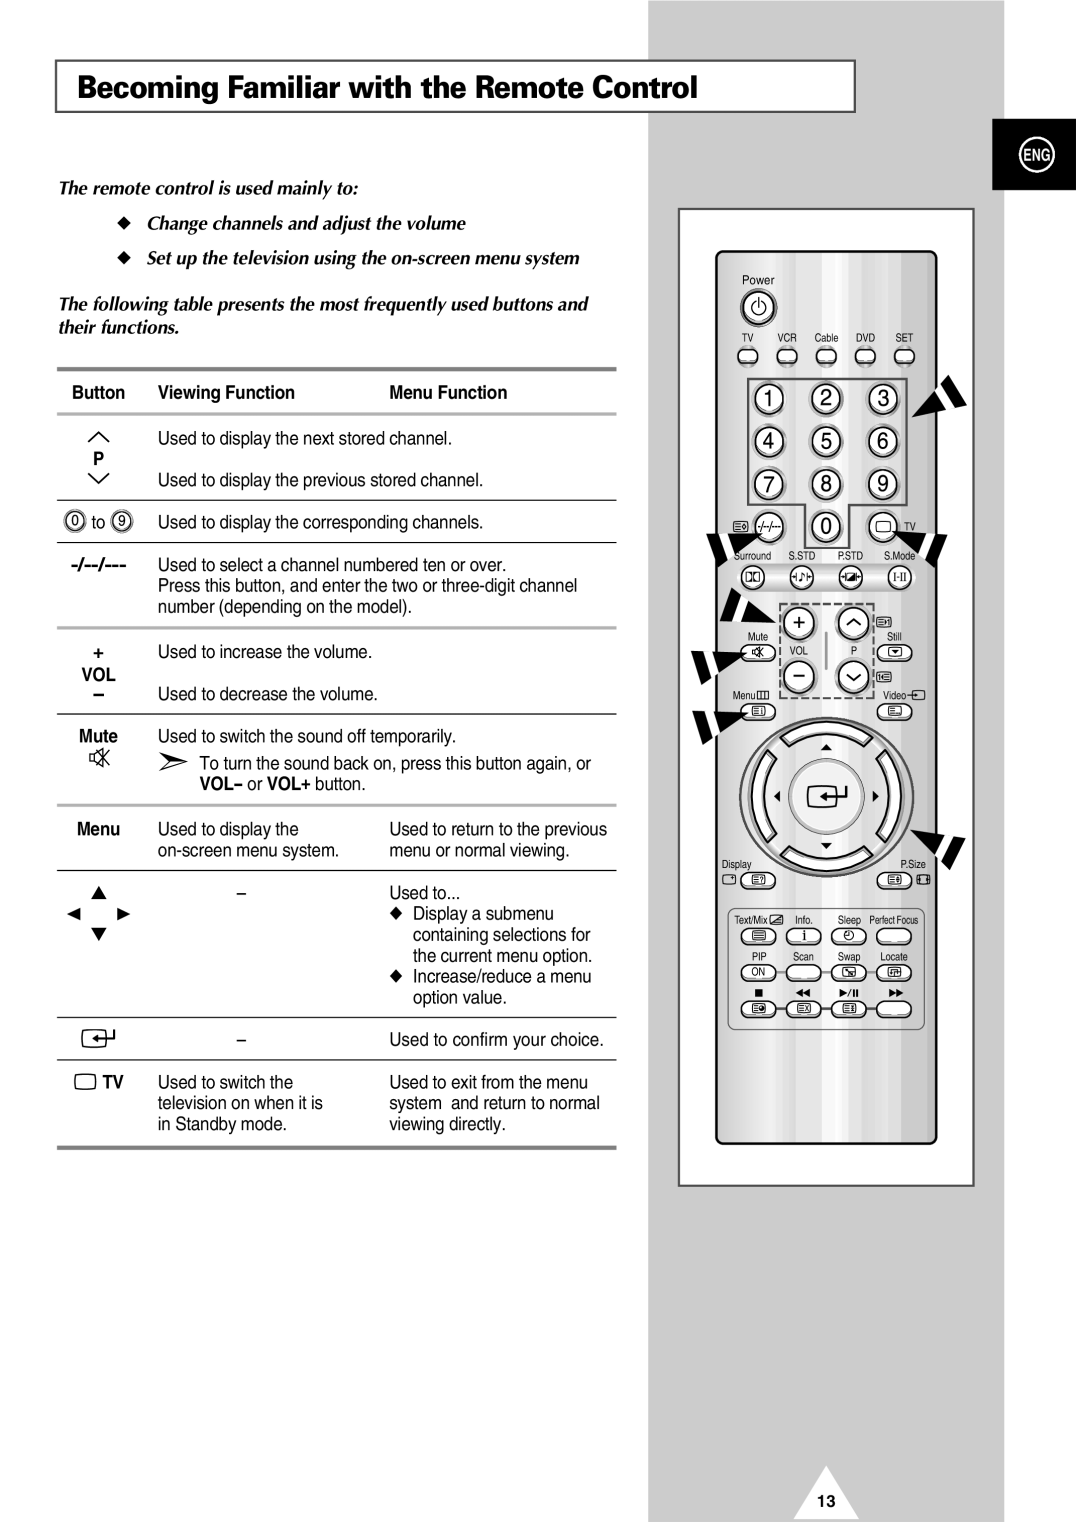 Samsung SP48T6, SP54T7, SP52Q7, SP47Q7 manual Becoming Familiar with the Remote Control, The remote control is used mainly to 